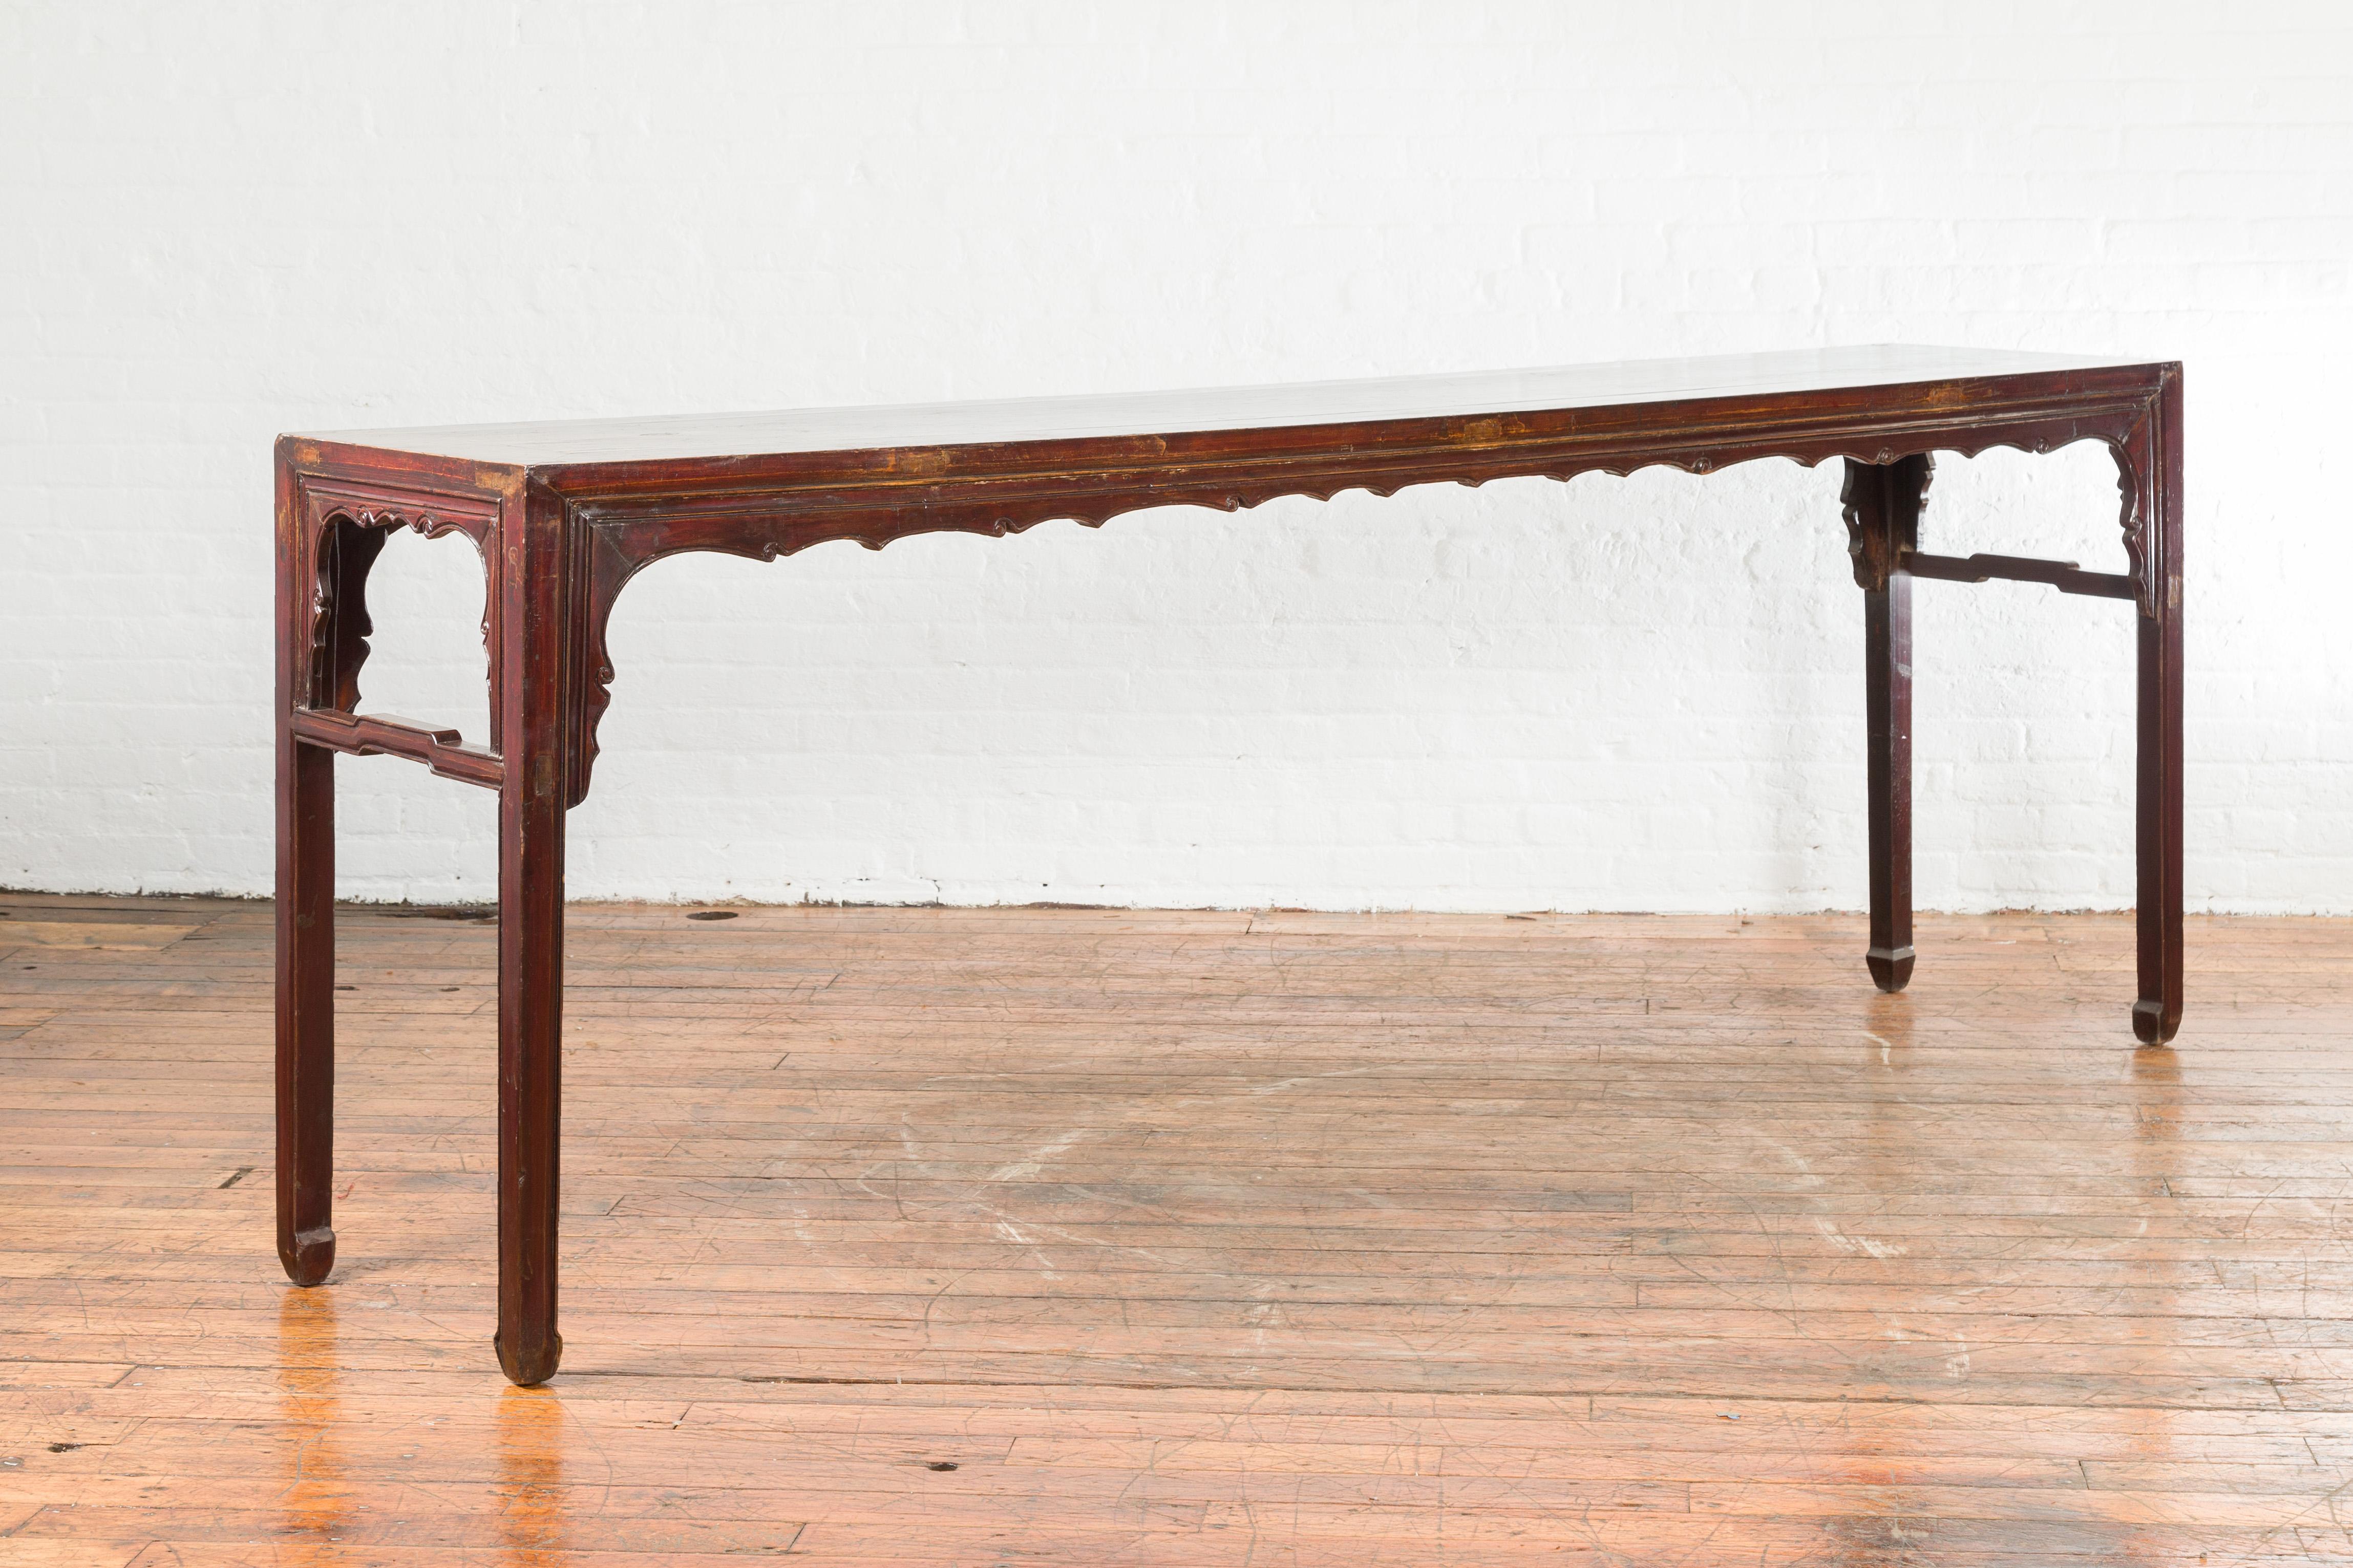 A Chinese Qing Dynasty period altar console table from the 19th century, with dark reddish brown patina. Created in China during the Qing Dynasty, this console table features a rectangular top with central board, sitting above a carved apron with